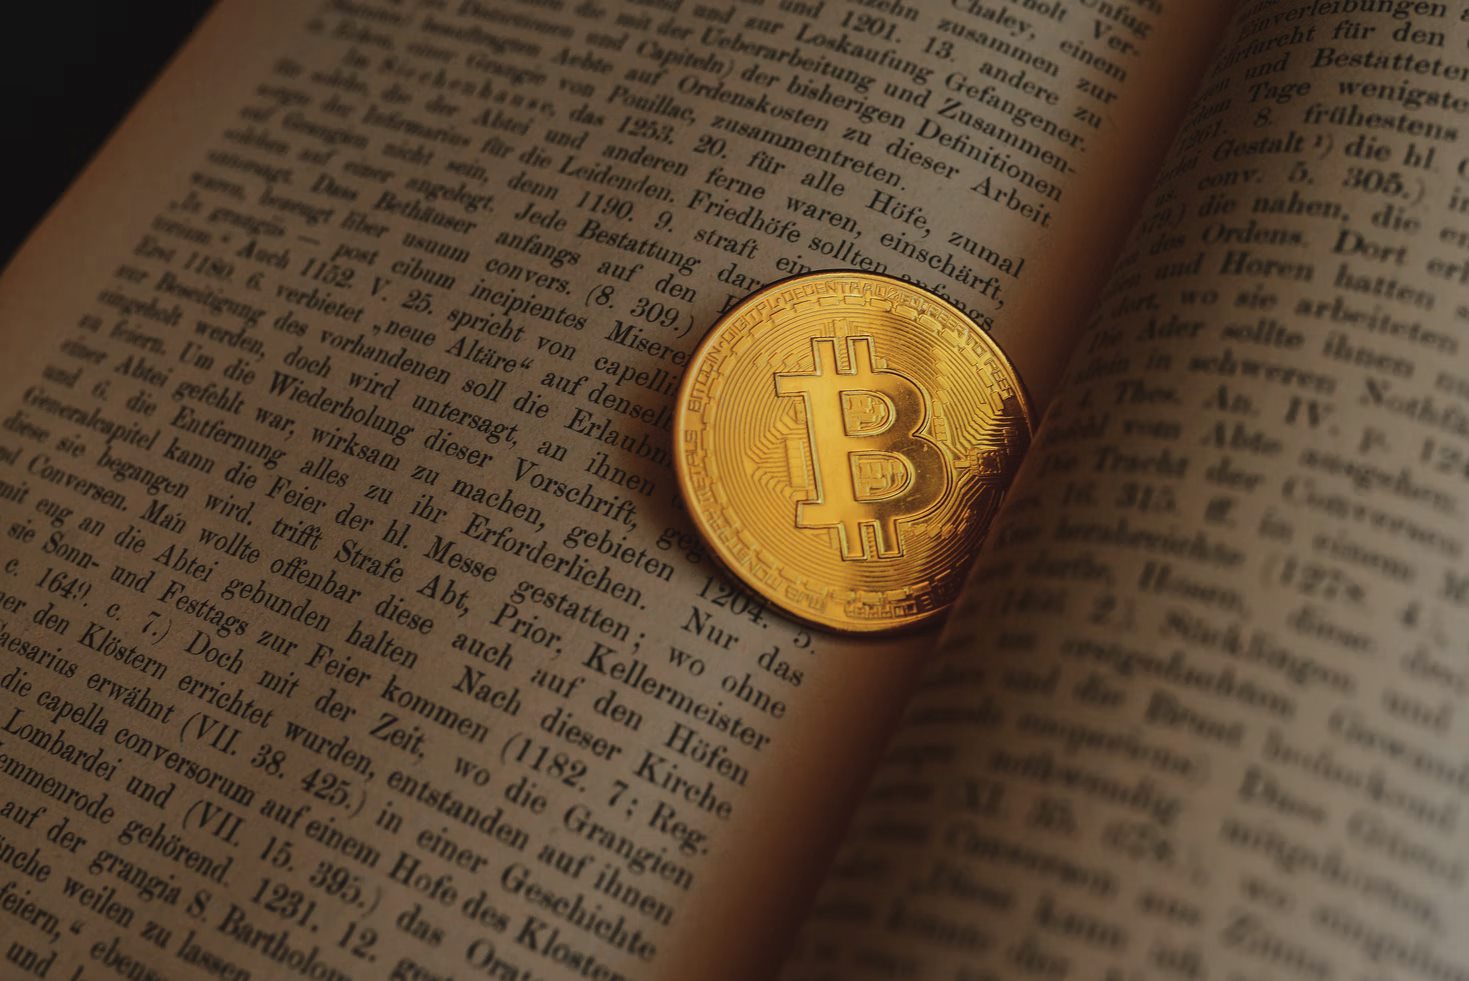 Best Books on Cryptocurrency